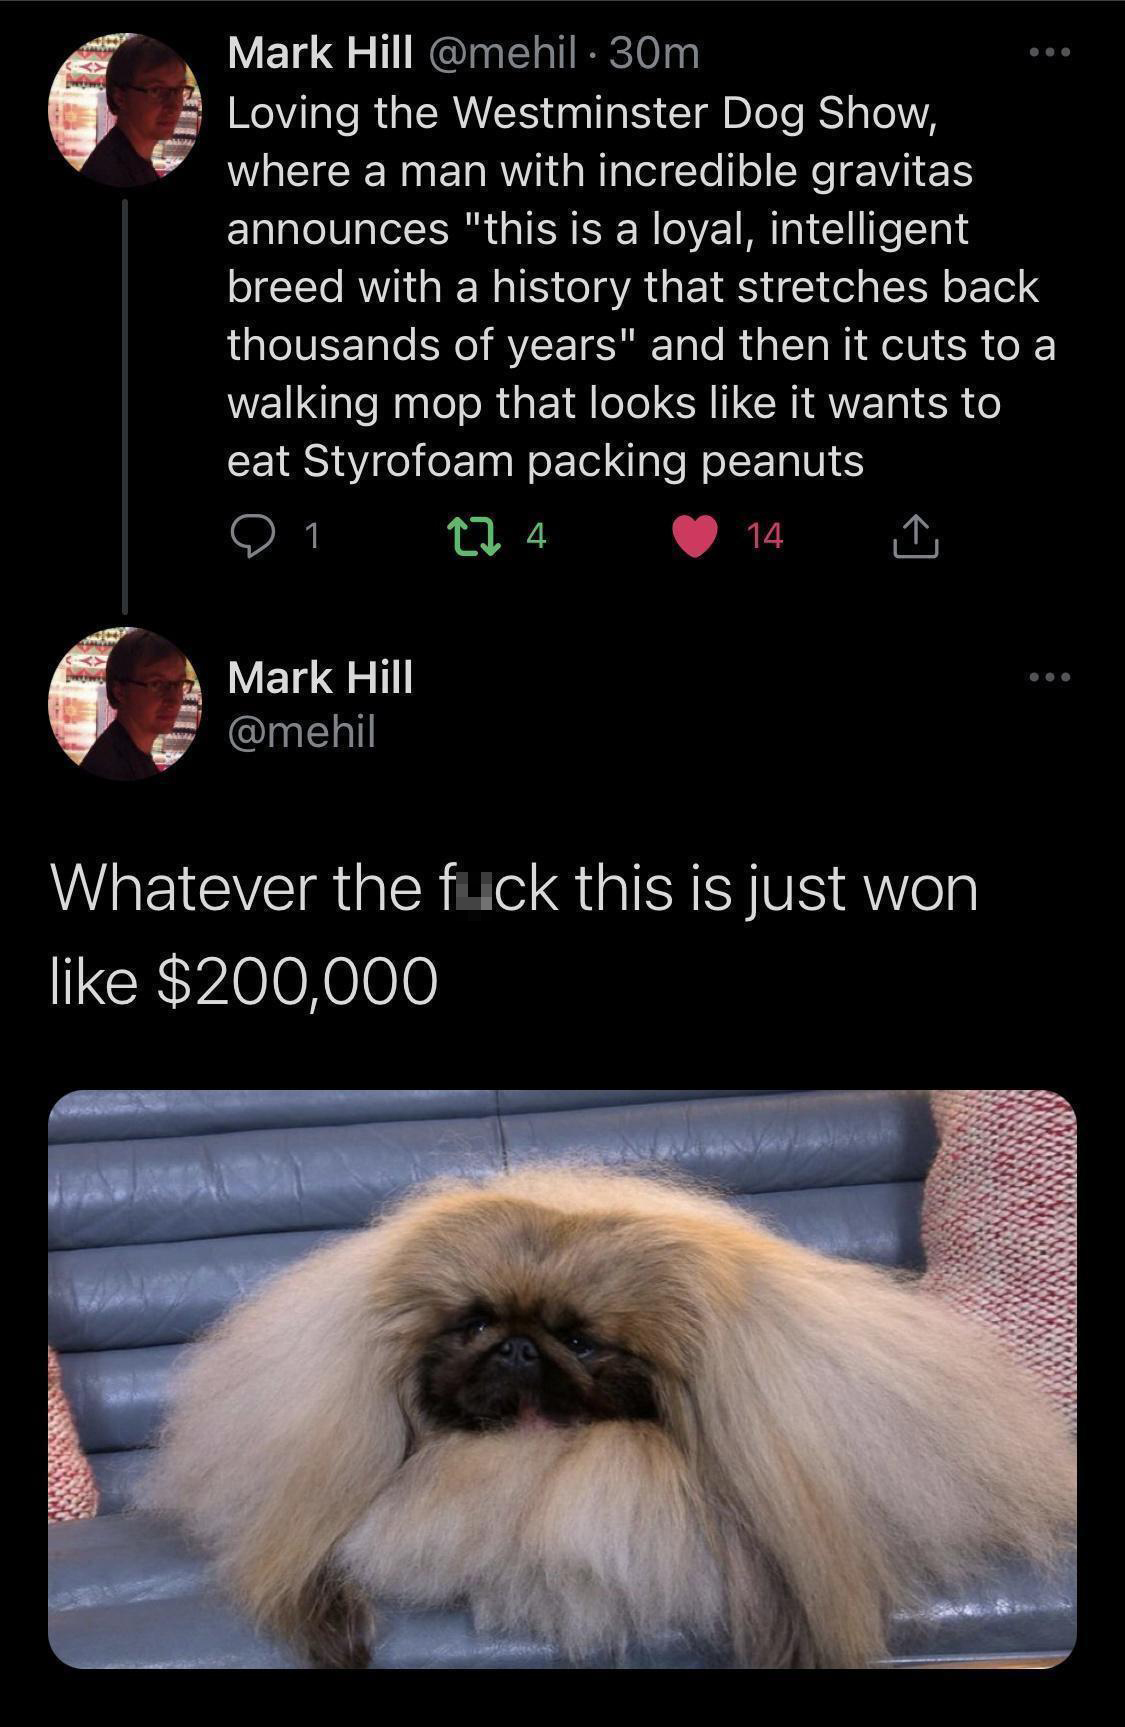 funny memes - pet - Mark Hill . 30m Loving the Westminster Dog Show, where a man with incredible gravitas announces "this is a loyal, intelligent breed with a history that stretches back thousands of years" and then it cuts to a walking mop that looks it 